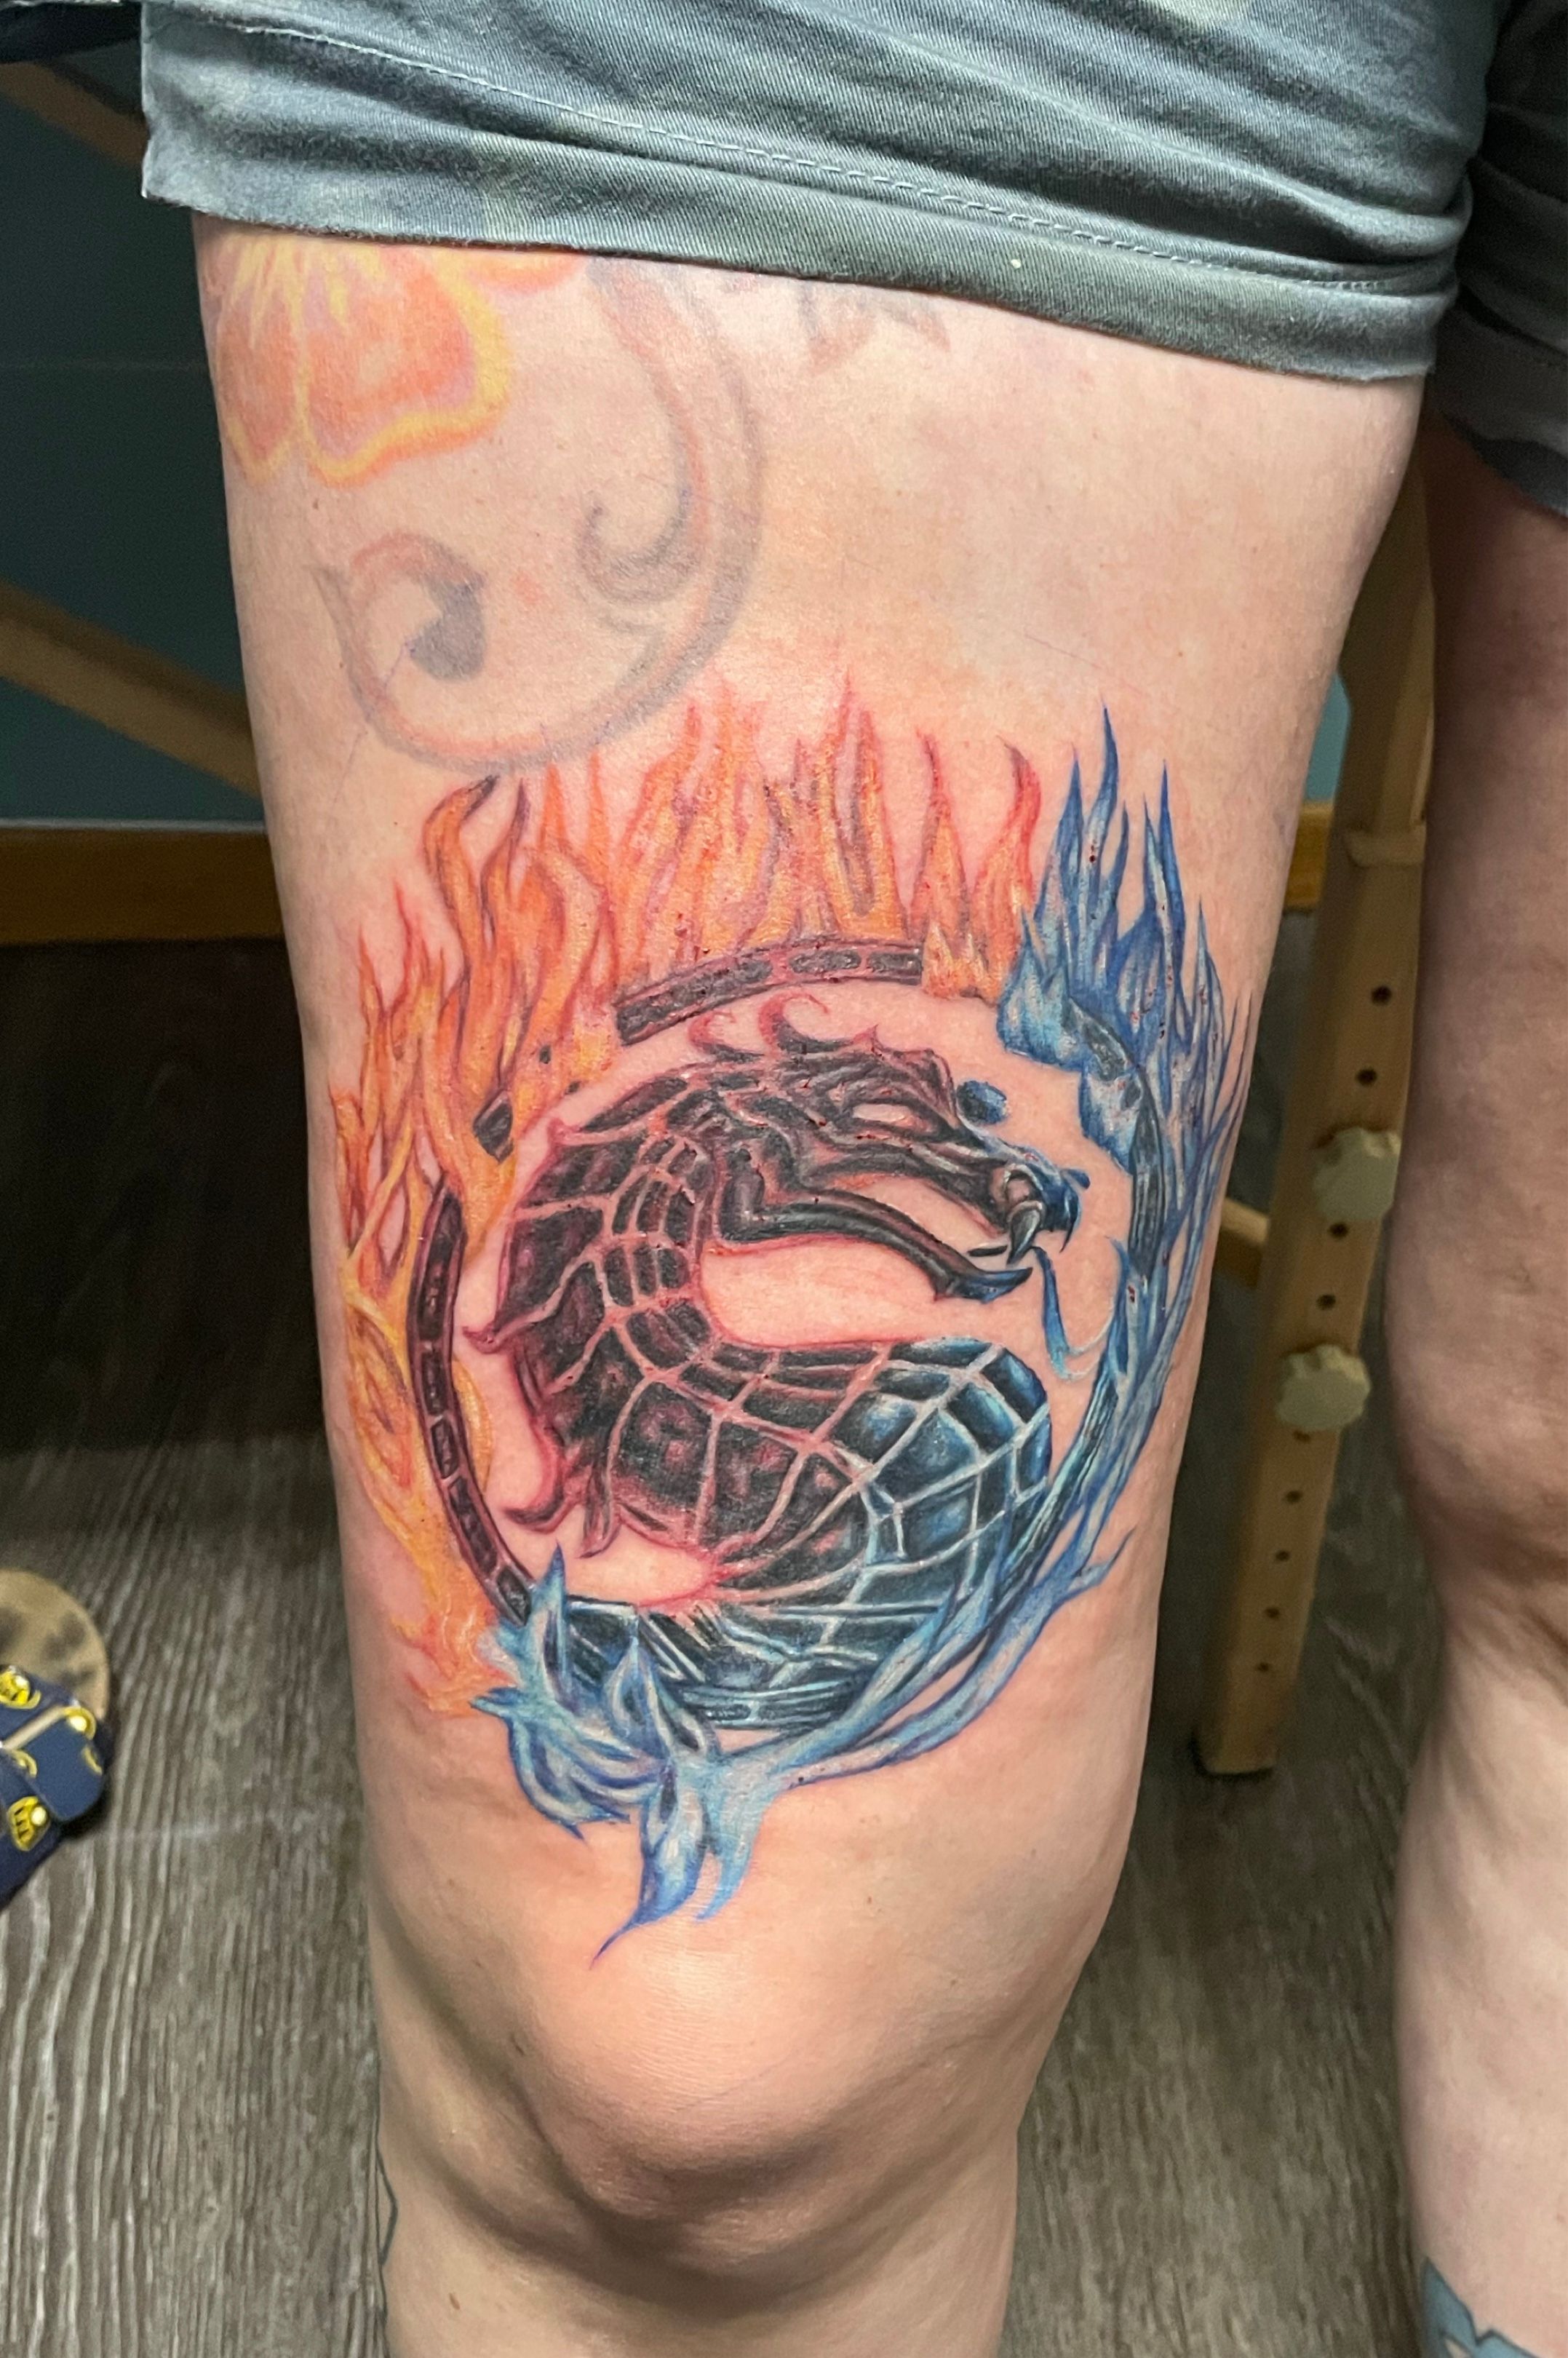 I finally got my first tattoo and it is beautiful What do you think  r MortalKombat